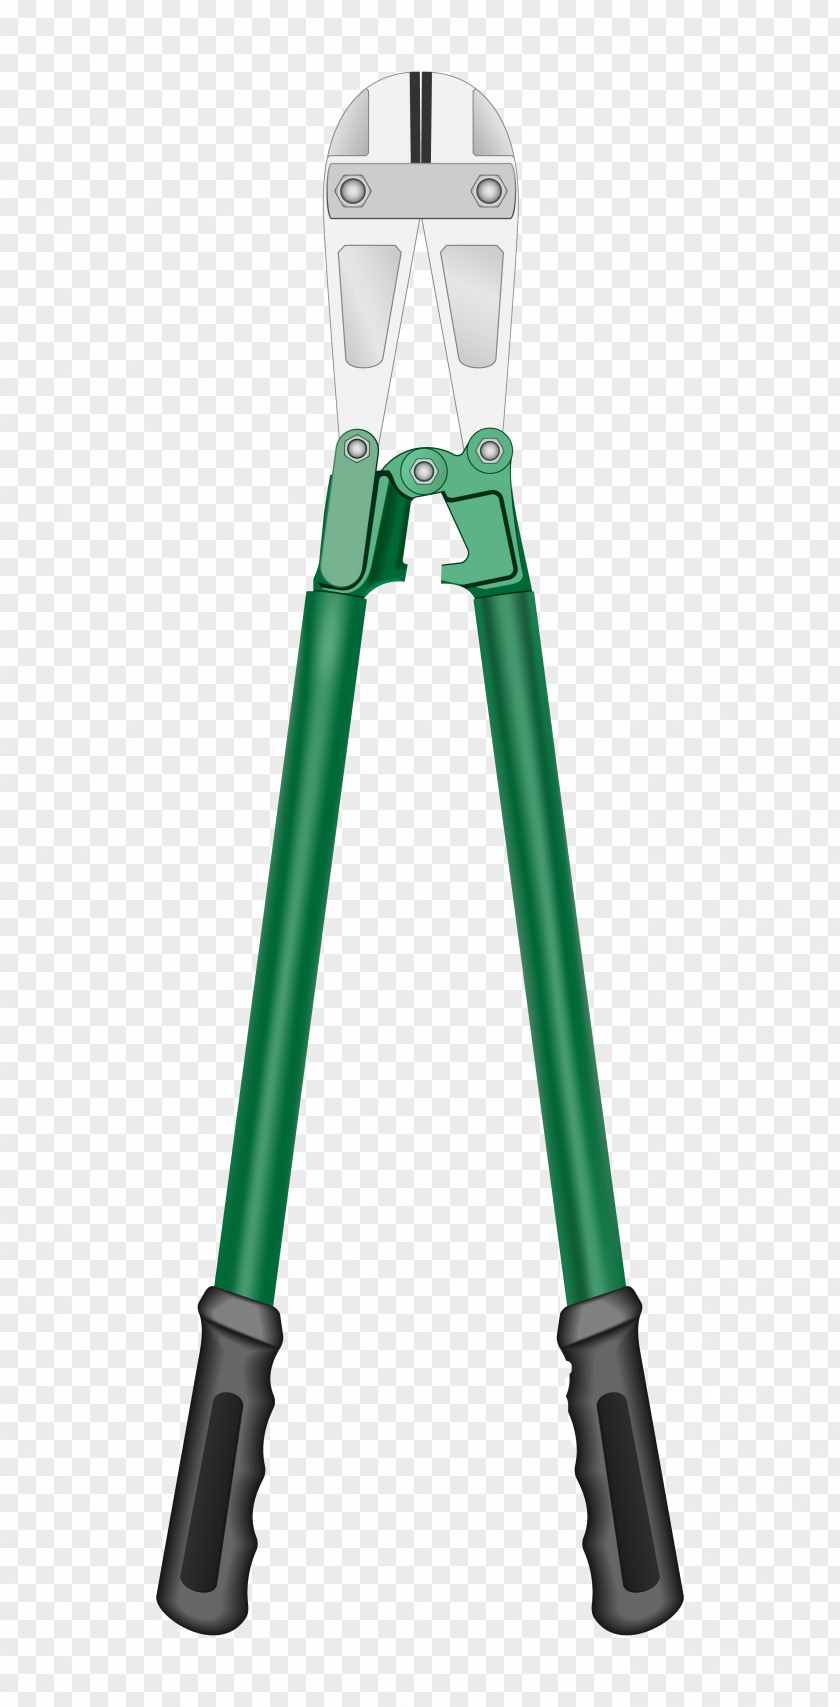 Green Vector Pliers Euclidean Tool Illustration PNG